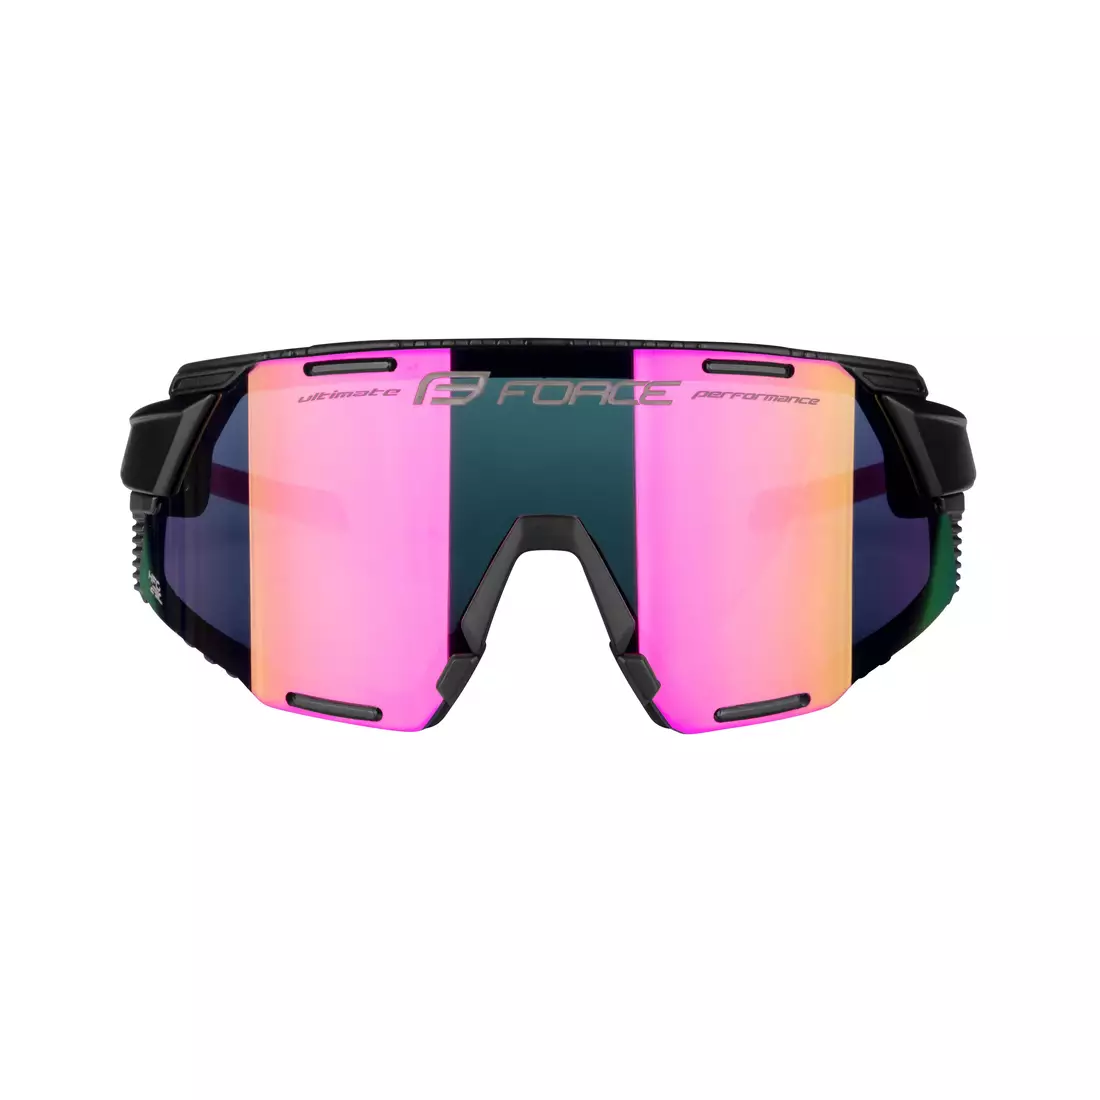 FORCE GRIP Sports glasses, purple REVO lenses, black and pink